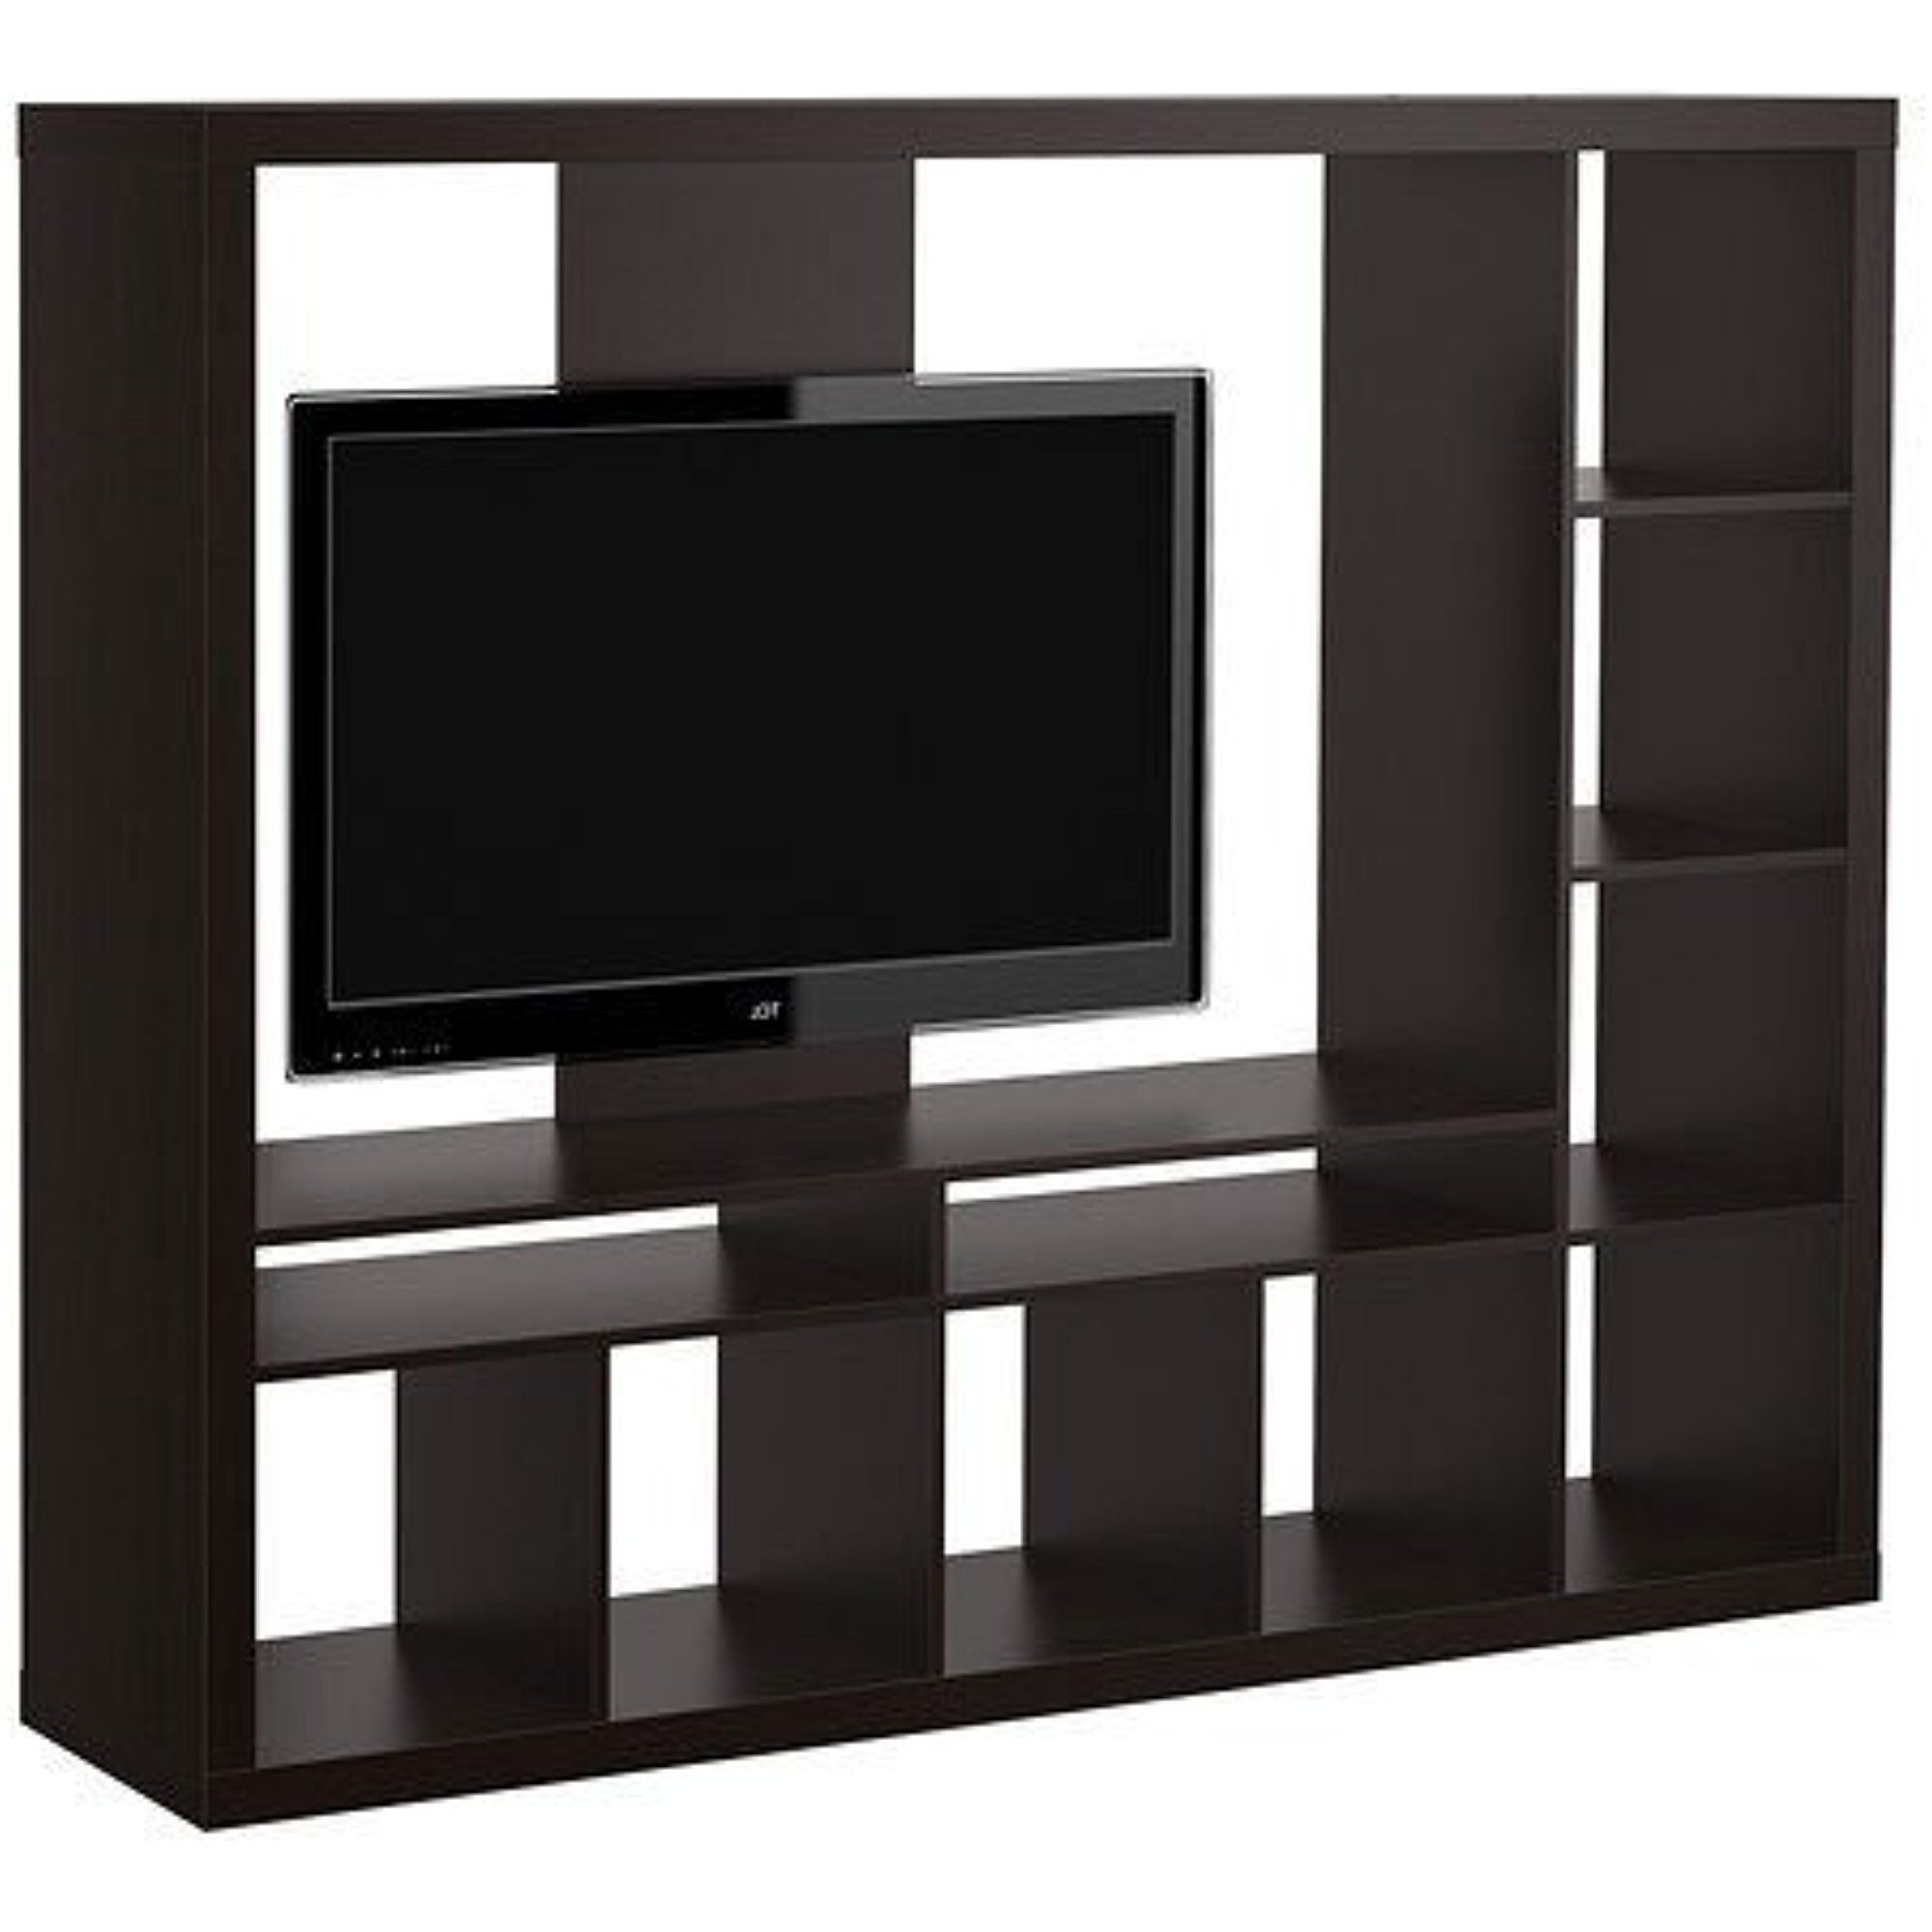 Sahika Tv Stands For Tvs Up To 55" Throughout Most Up To Date Ikea Expedit Entertainment Center Tv Stand Up To 55" Flat (View 24 of 25)